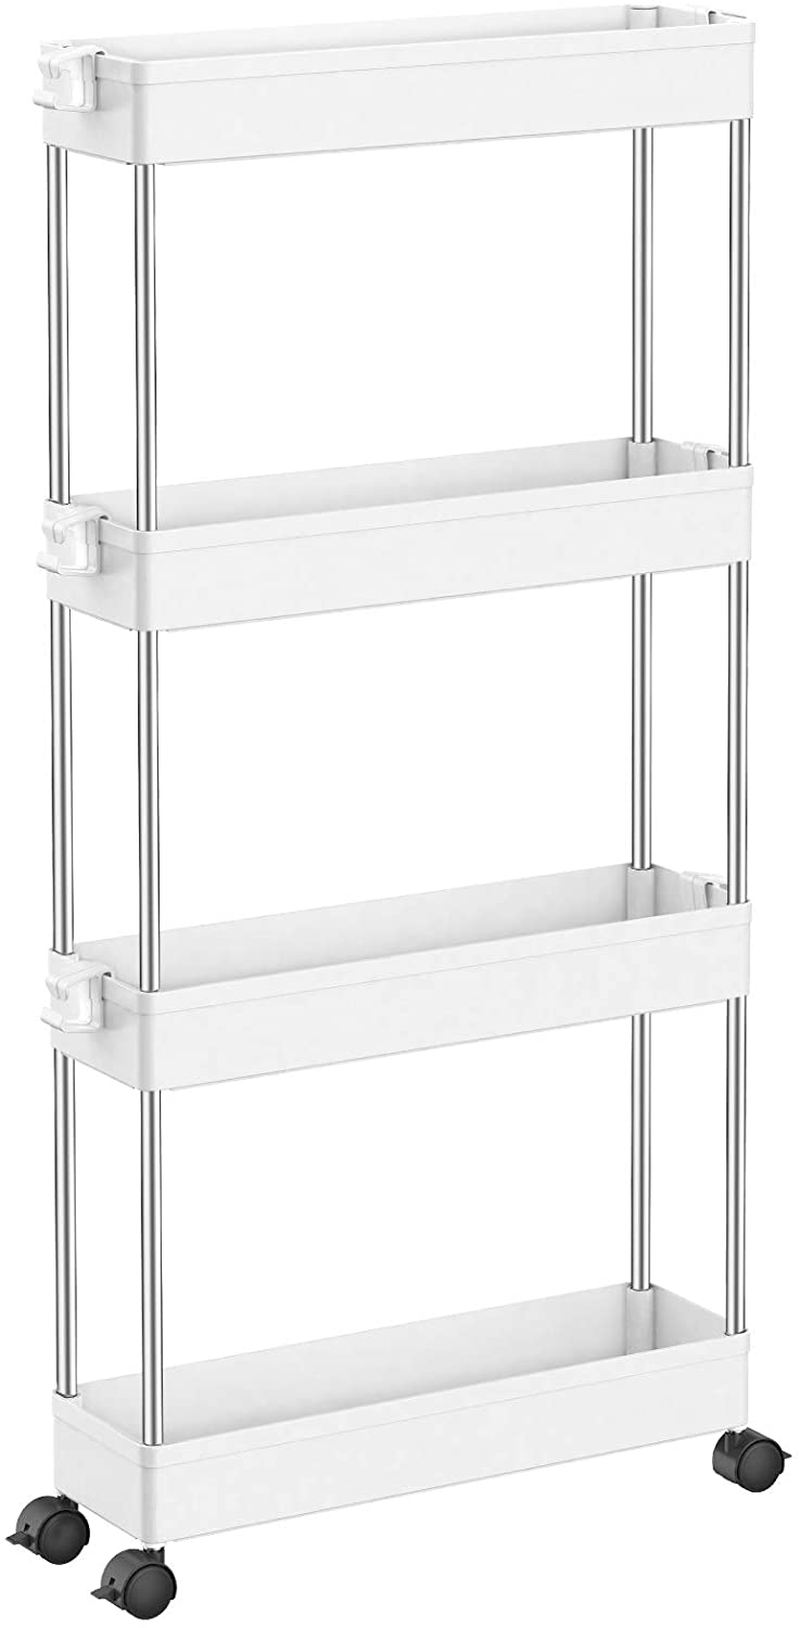 SPACEKEEPER Storage Cart 4 Tier Slim Mobile Shelving Unit Organizer Slide Out Storage Rolling Utility Cart Tower Rack for Kitchen Bathroom Laundry Narrow Places, Plastic & Stainless Steel, Gray Home & Garden > Household Supplies > Storage & Organization SPACEKEEPER White  